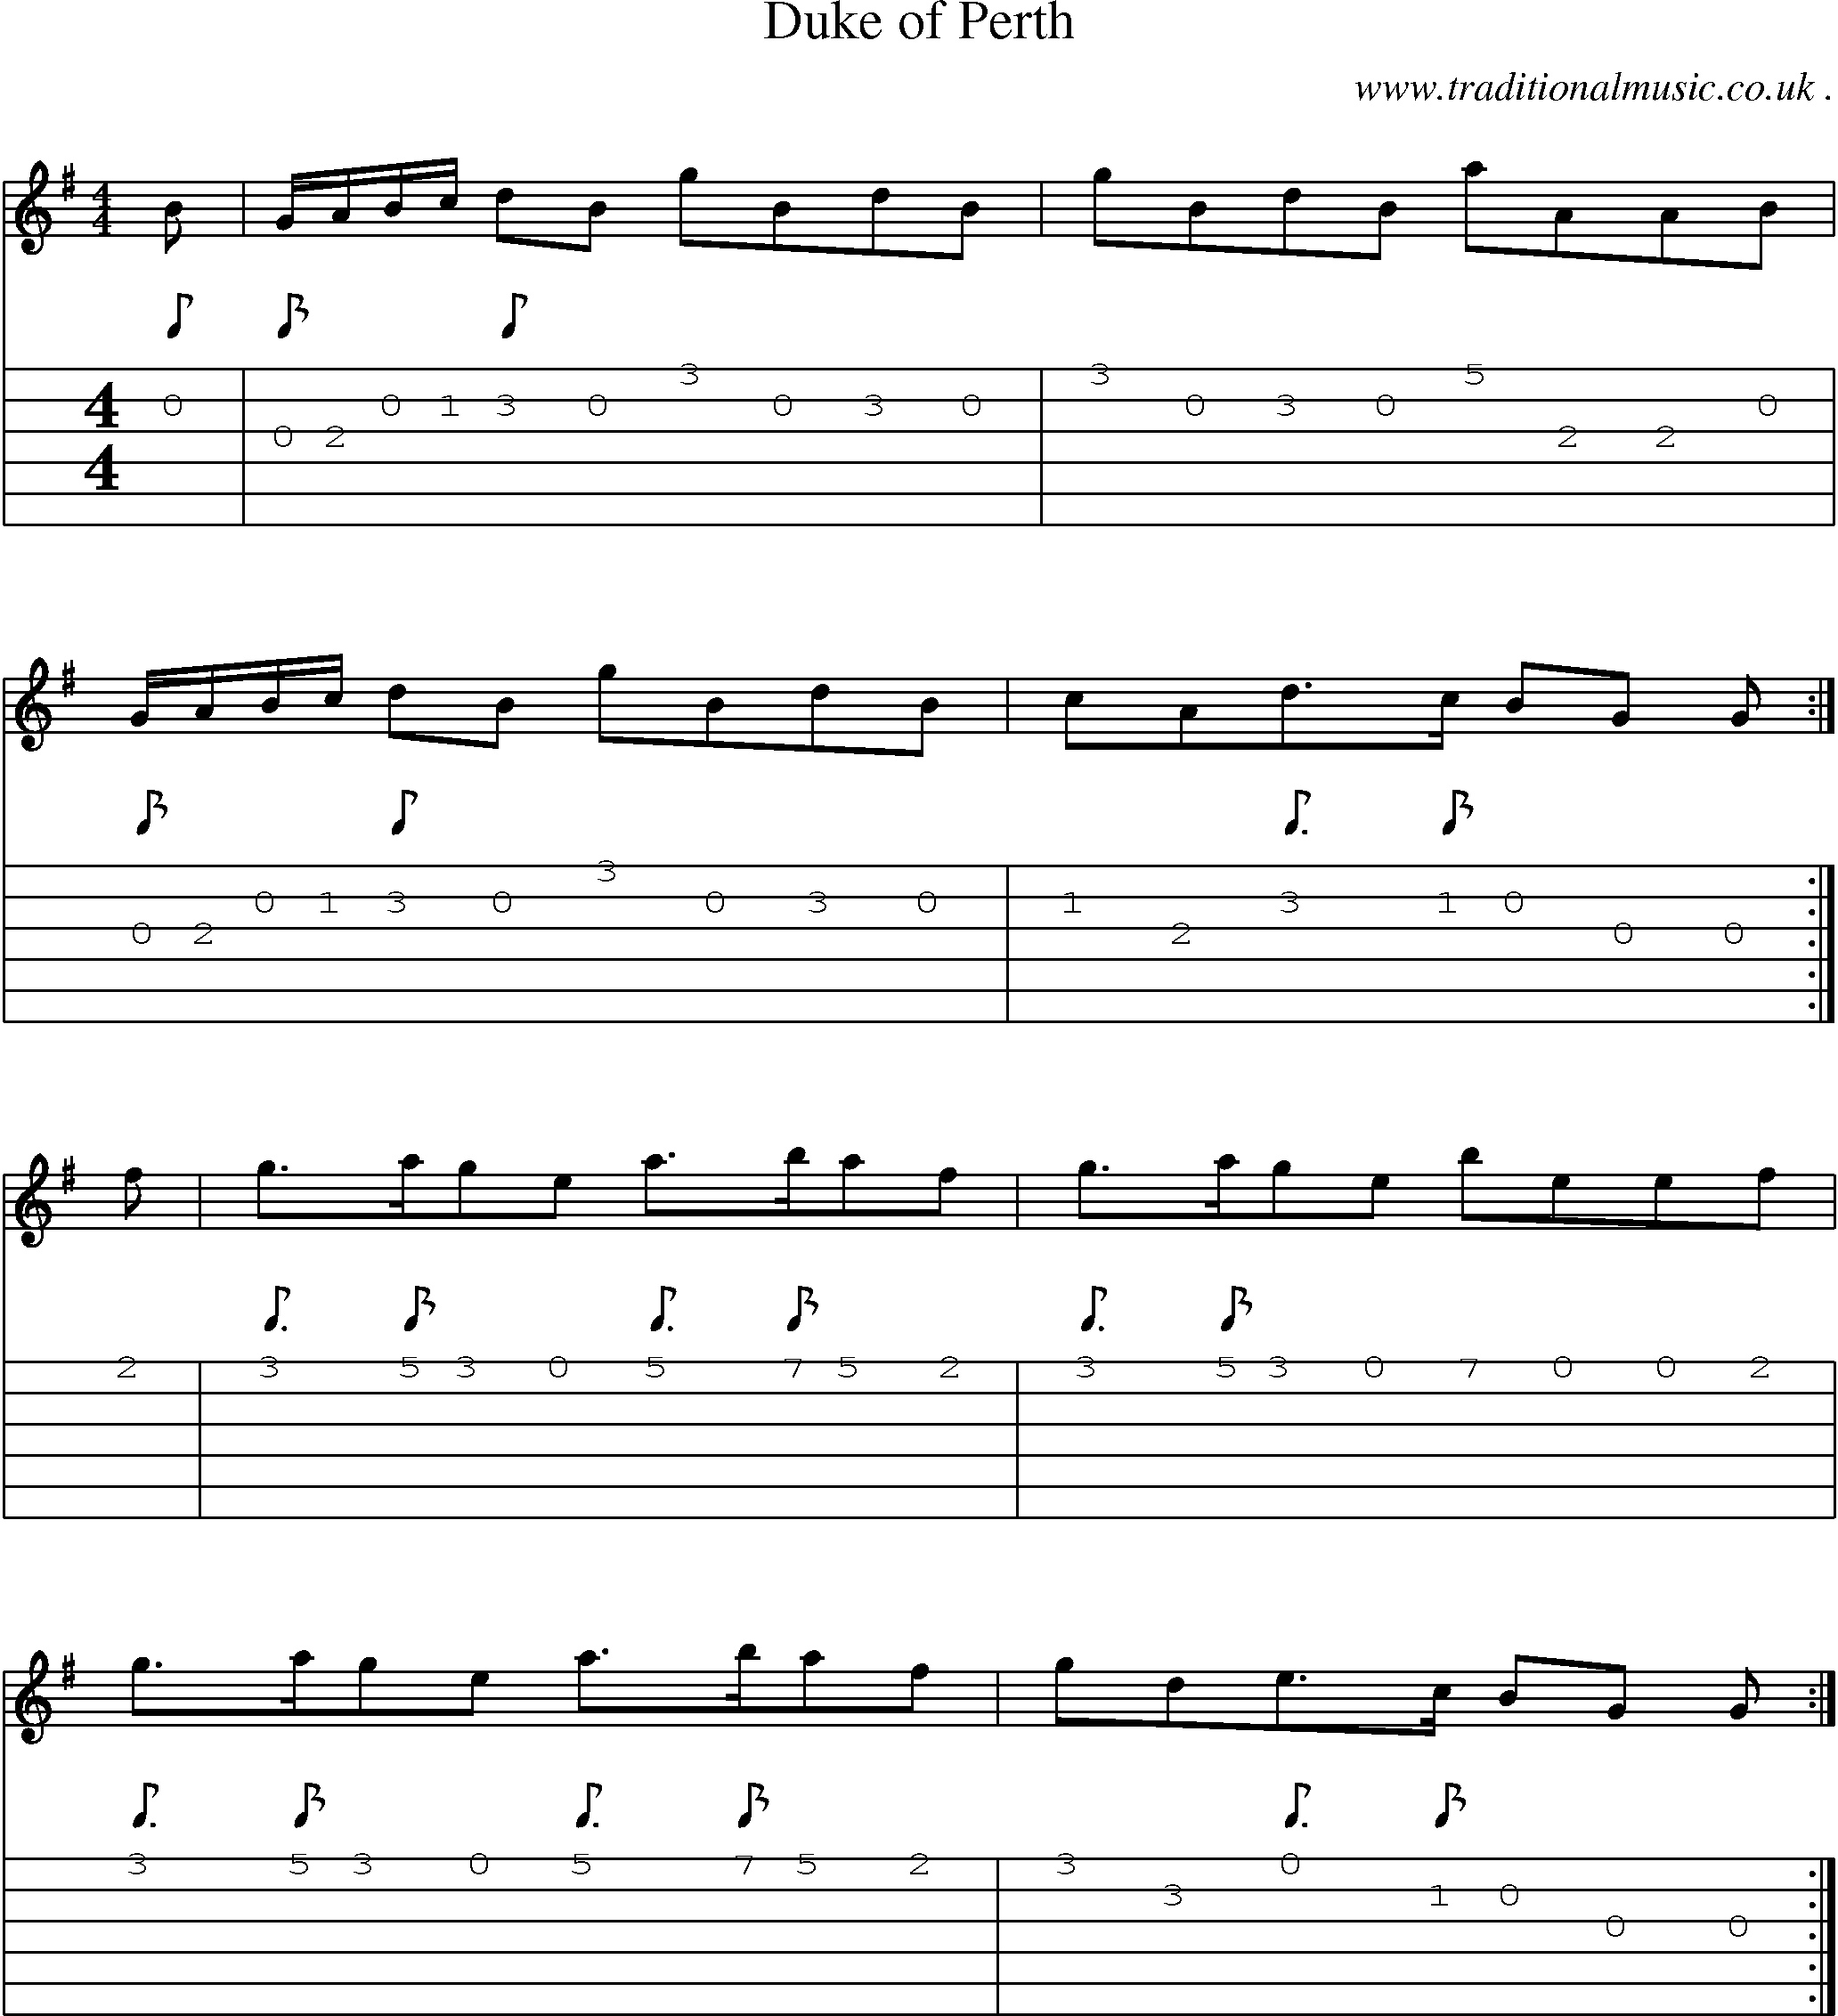 Sheet-music  score, Chords and Guitar Tabs for Duke Of Perth